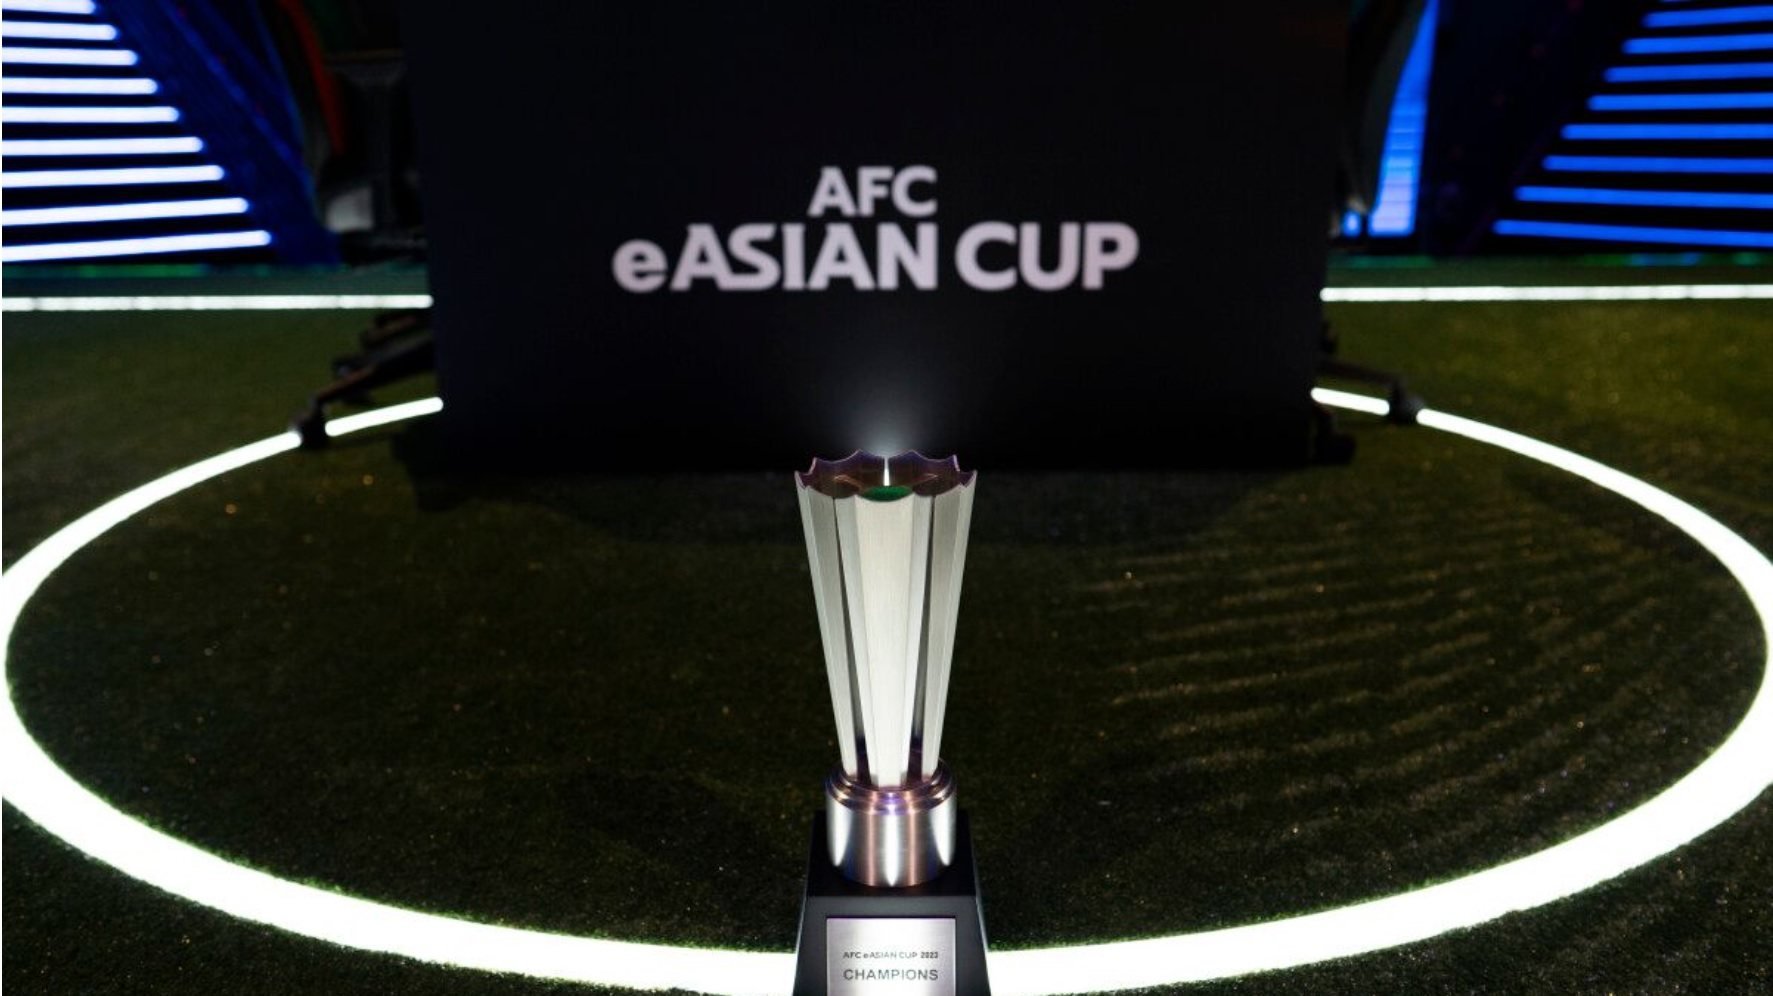 The AFC eAsian Cup gets under way in Qatar on Thursday. Hong Kong were expected to be among the 20 teams involved in the competition. Photo: AFC